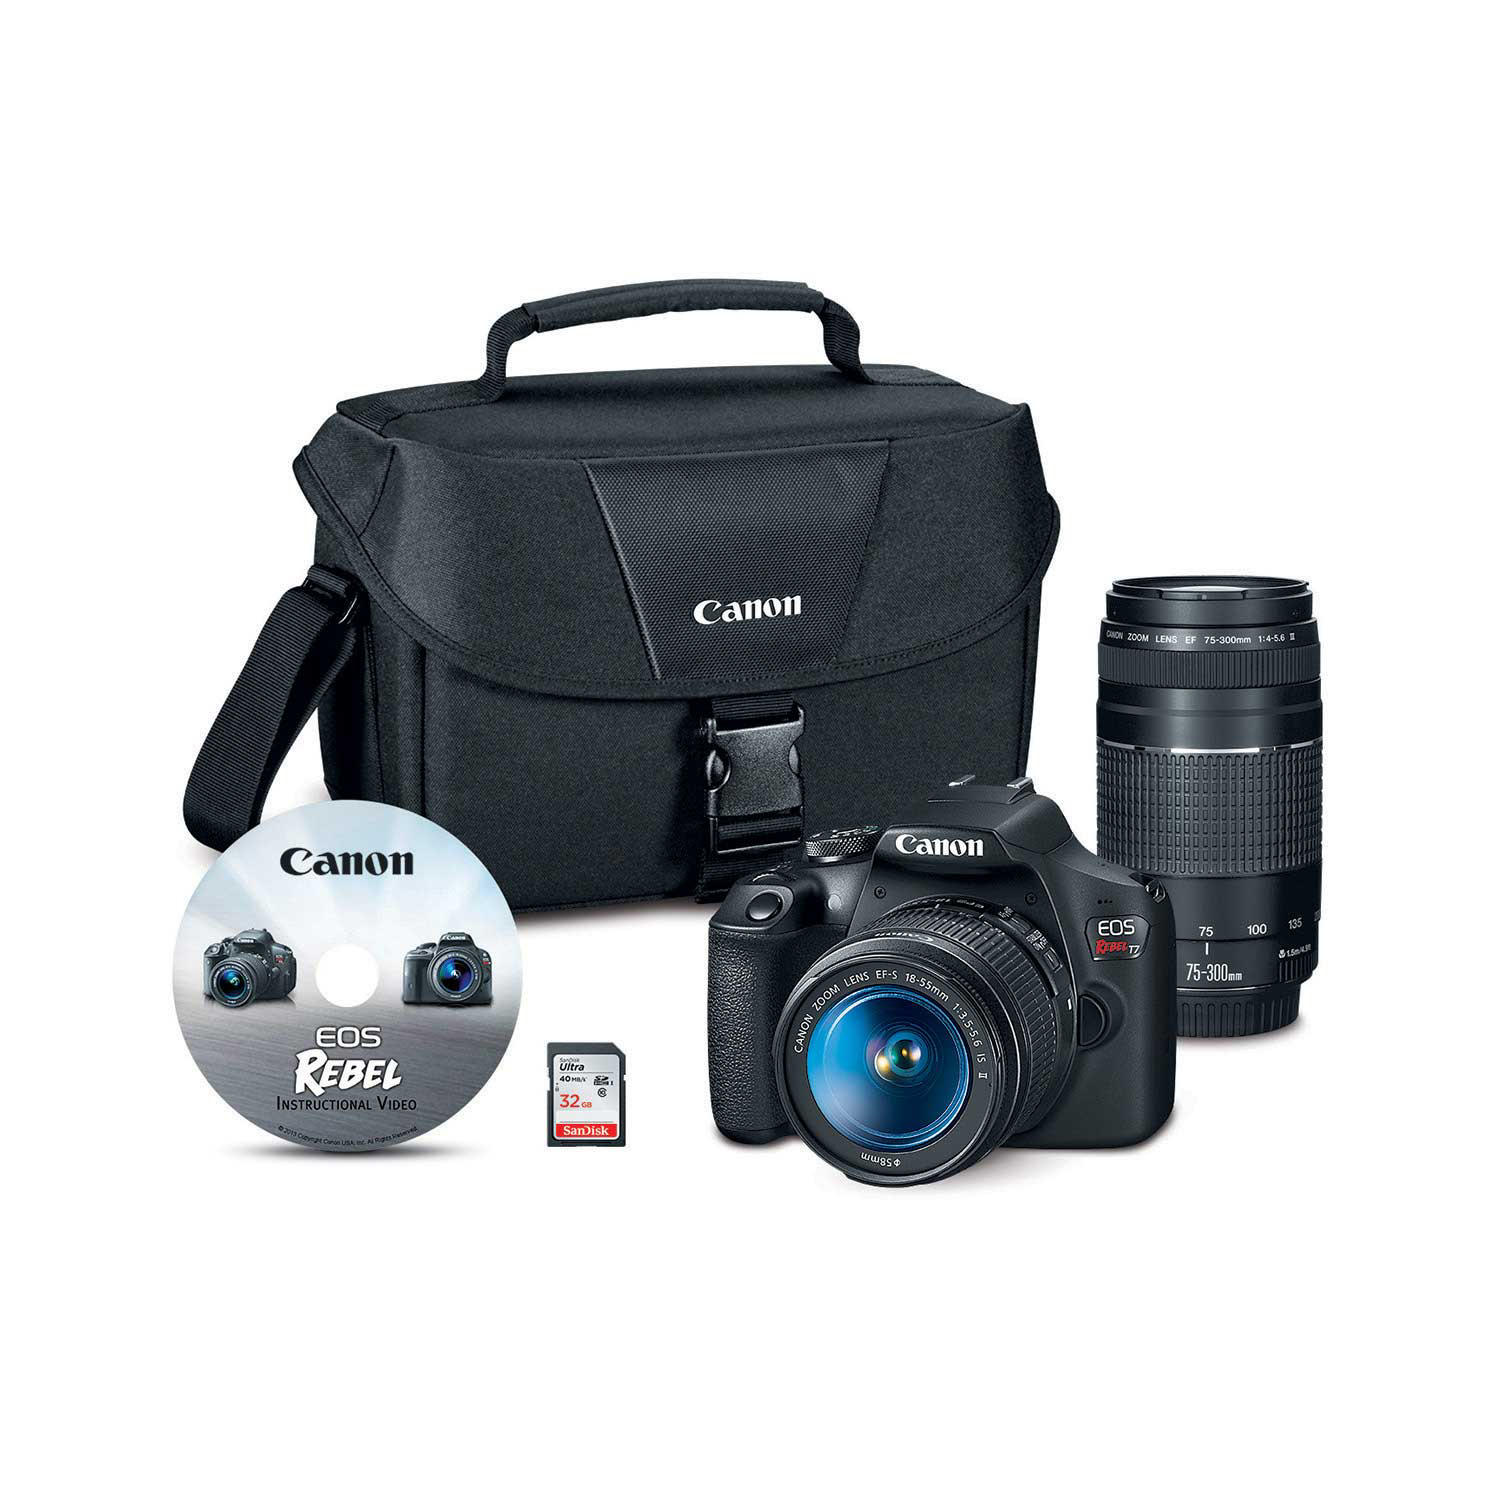 Canon EOS Rebel T7 24.1MP Digital SLR Camera Bundle with EF-S 18-55mm IS Lens, 70-300mm Lens, 32GB SD Card,